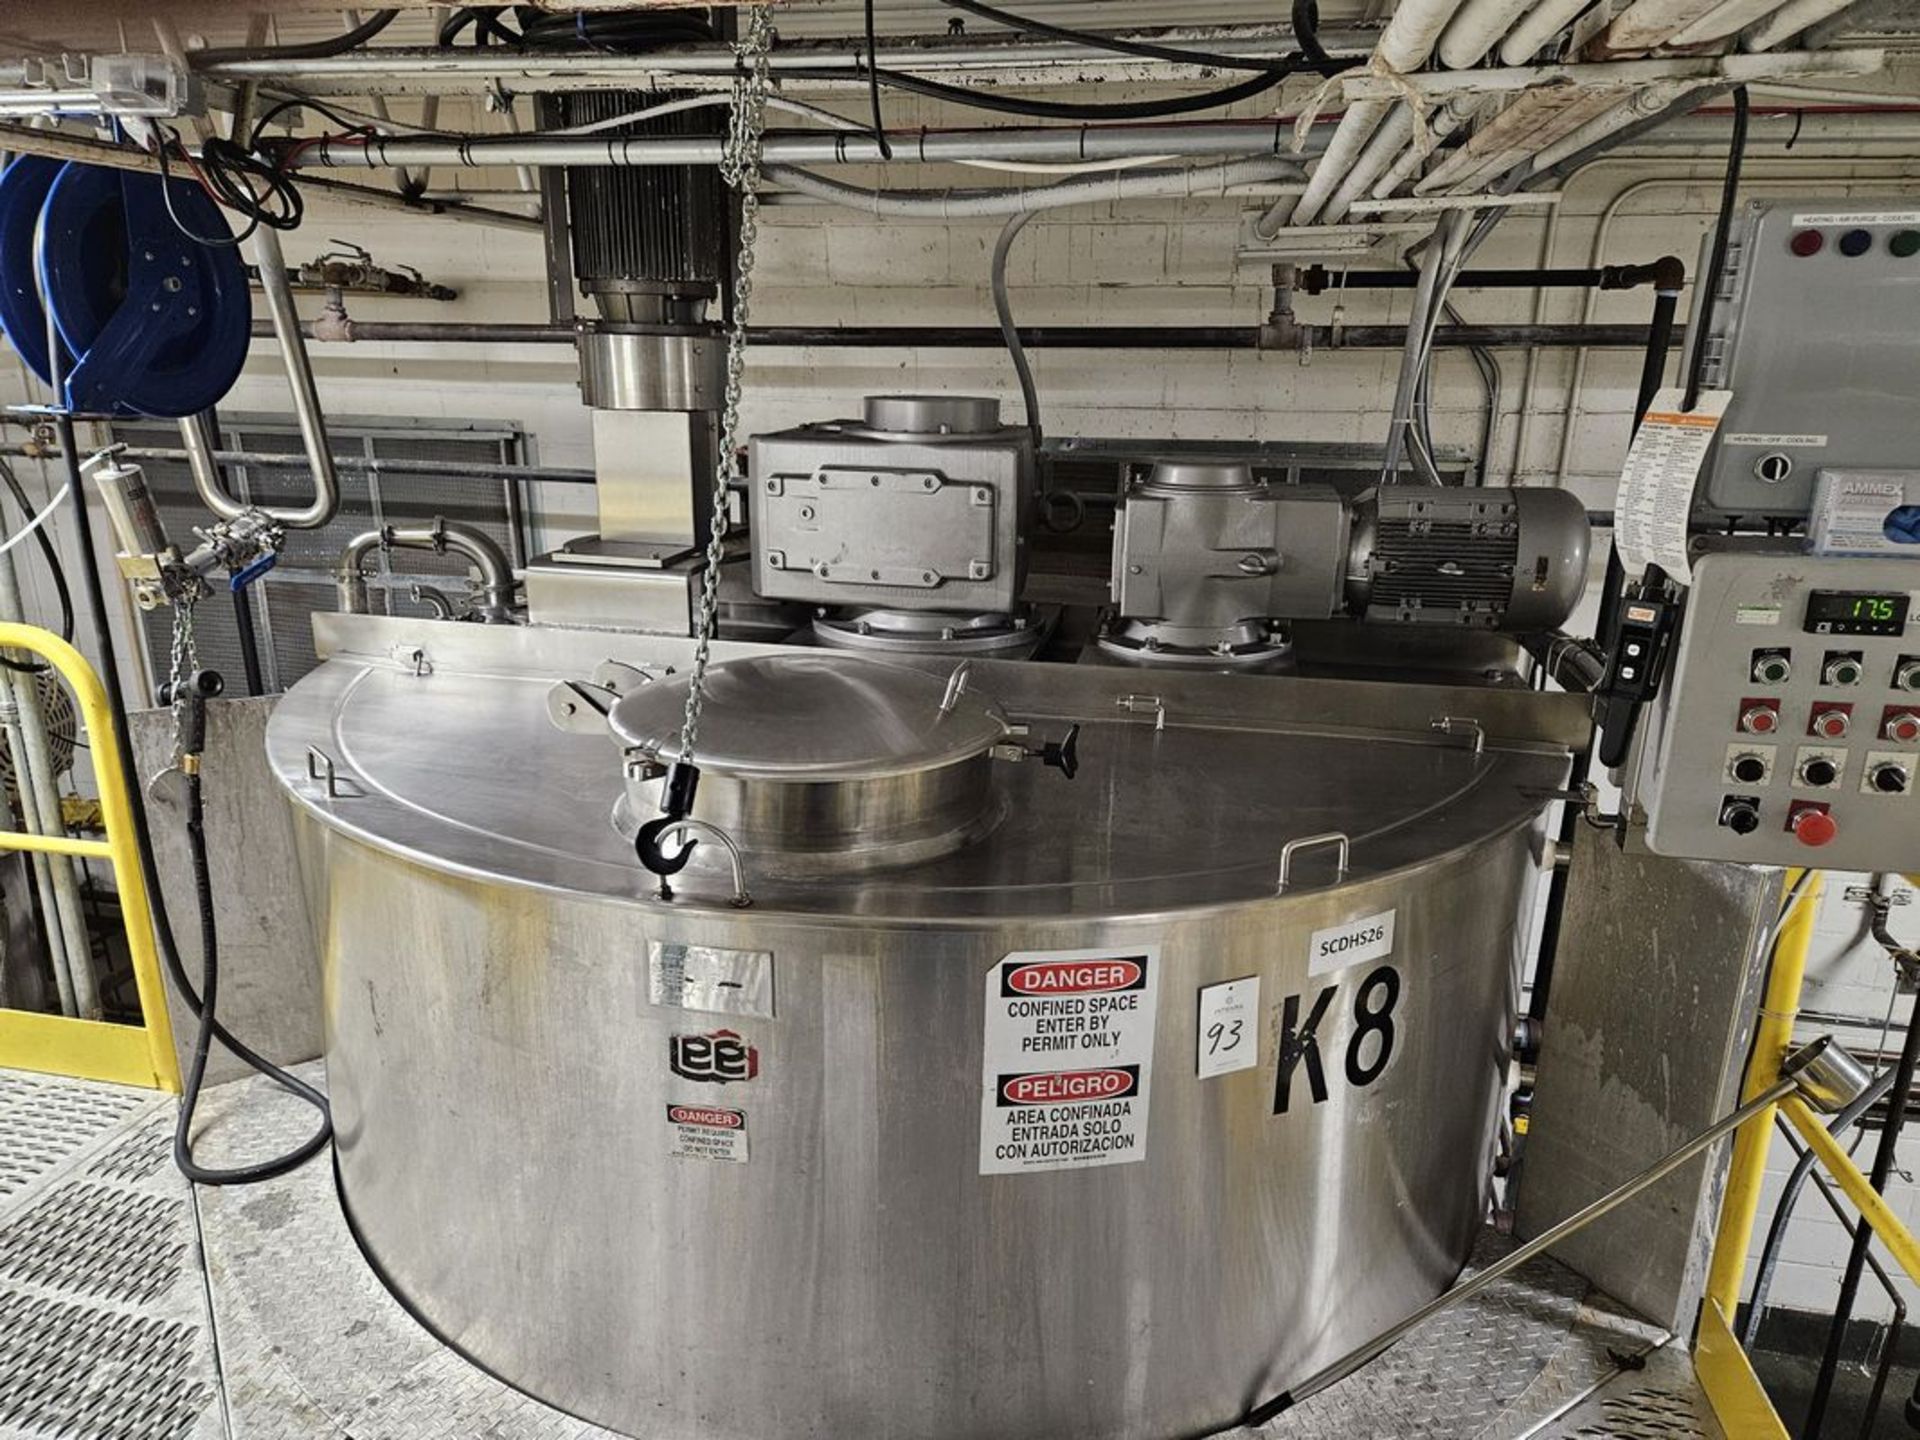 Lee Industries 3000U10S 3000-Gallon Stainless Steel Jacketed Kettle - Image 2 of 12